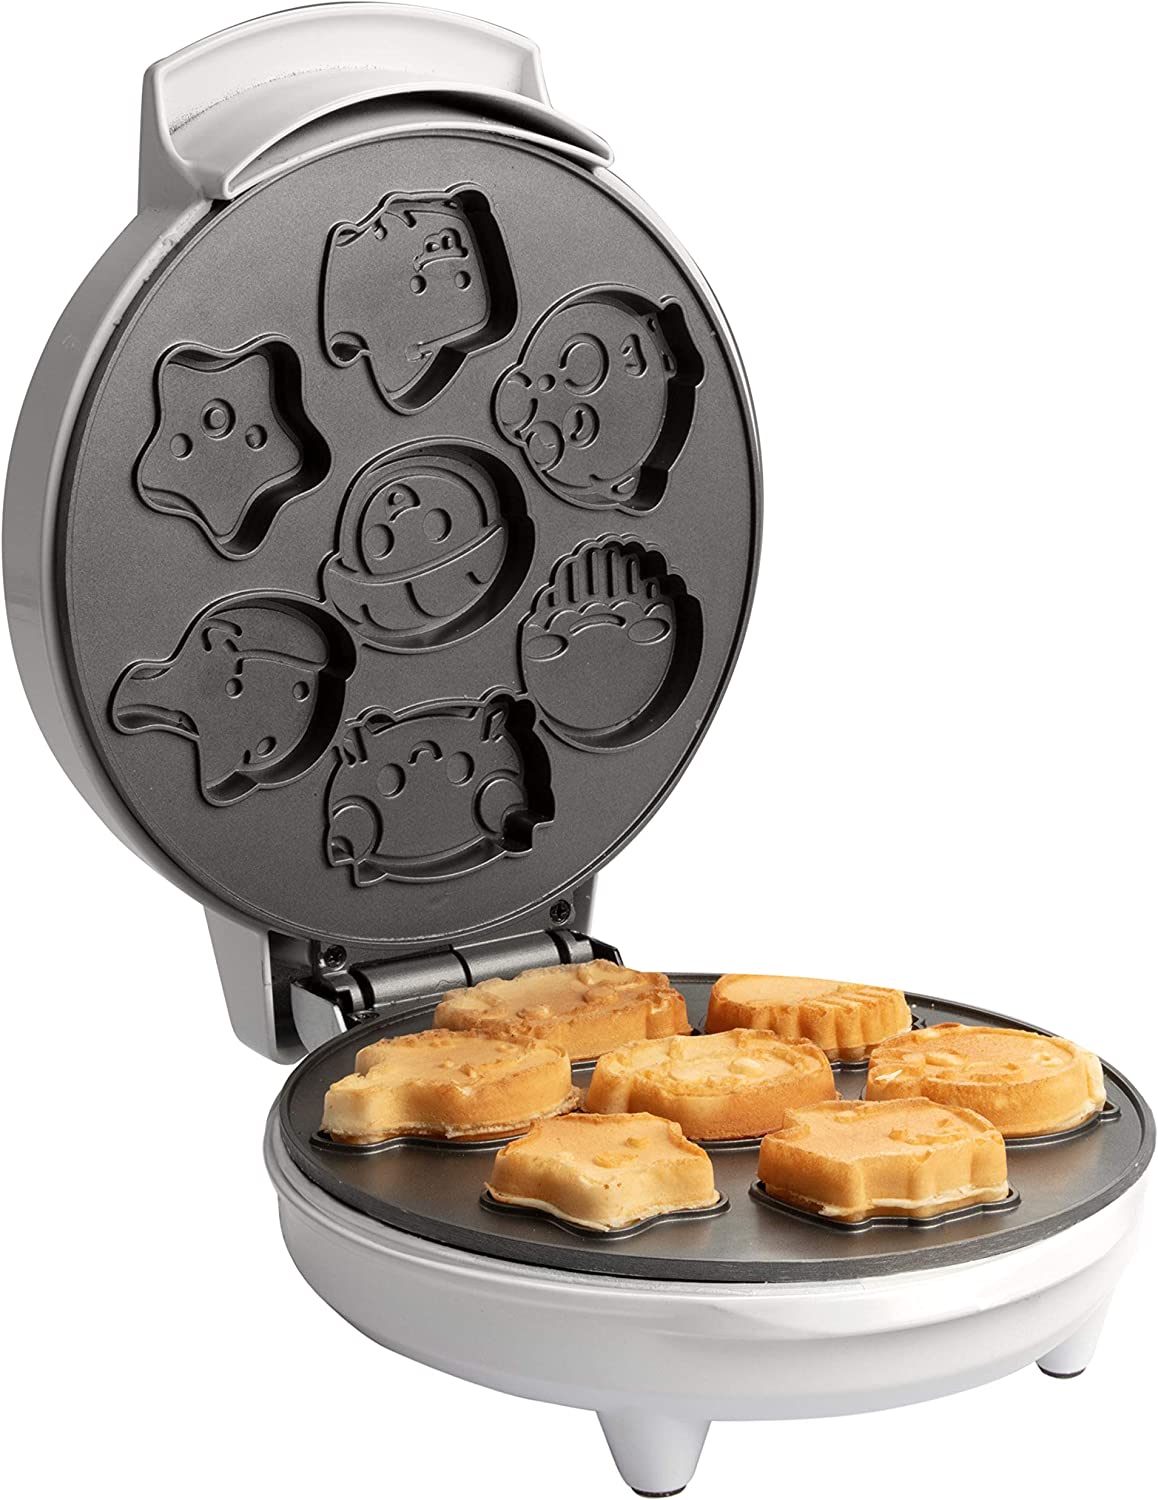 A waffle maker that makes sea creature shaped waffles. The waffle maker is open with 7 cooked sea creature shaped waffles inside the maker.